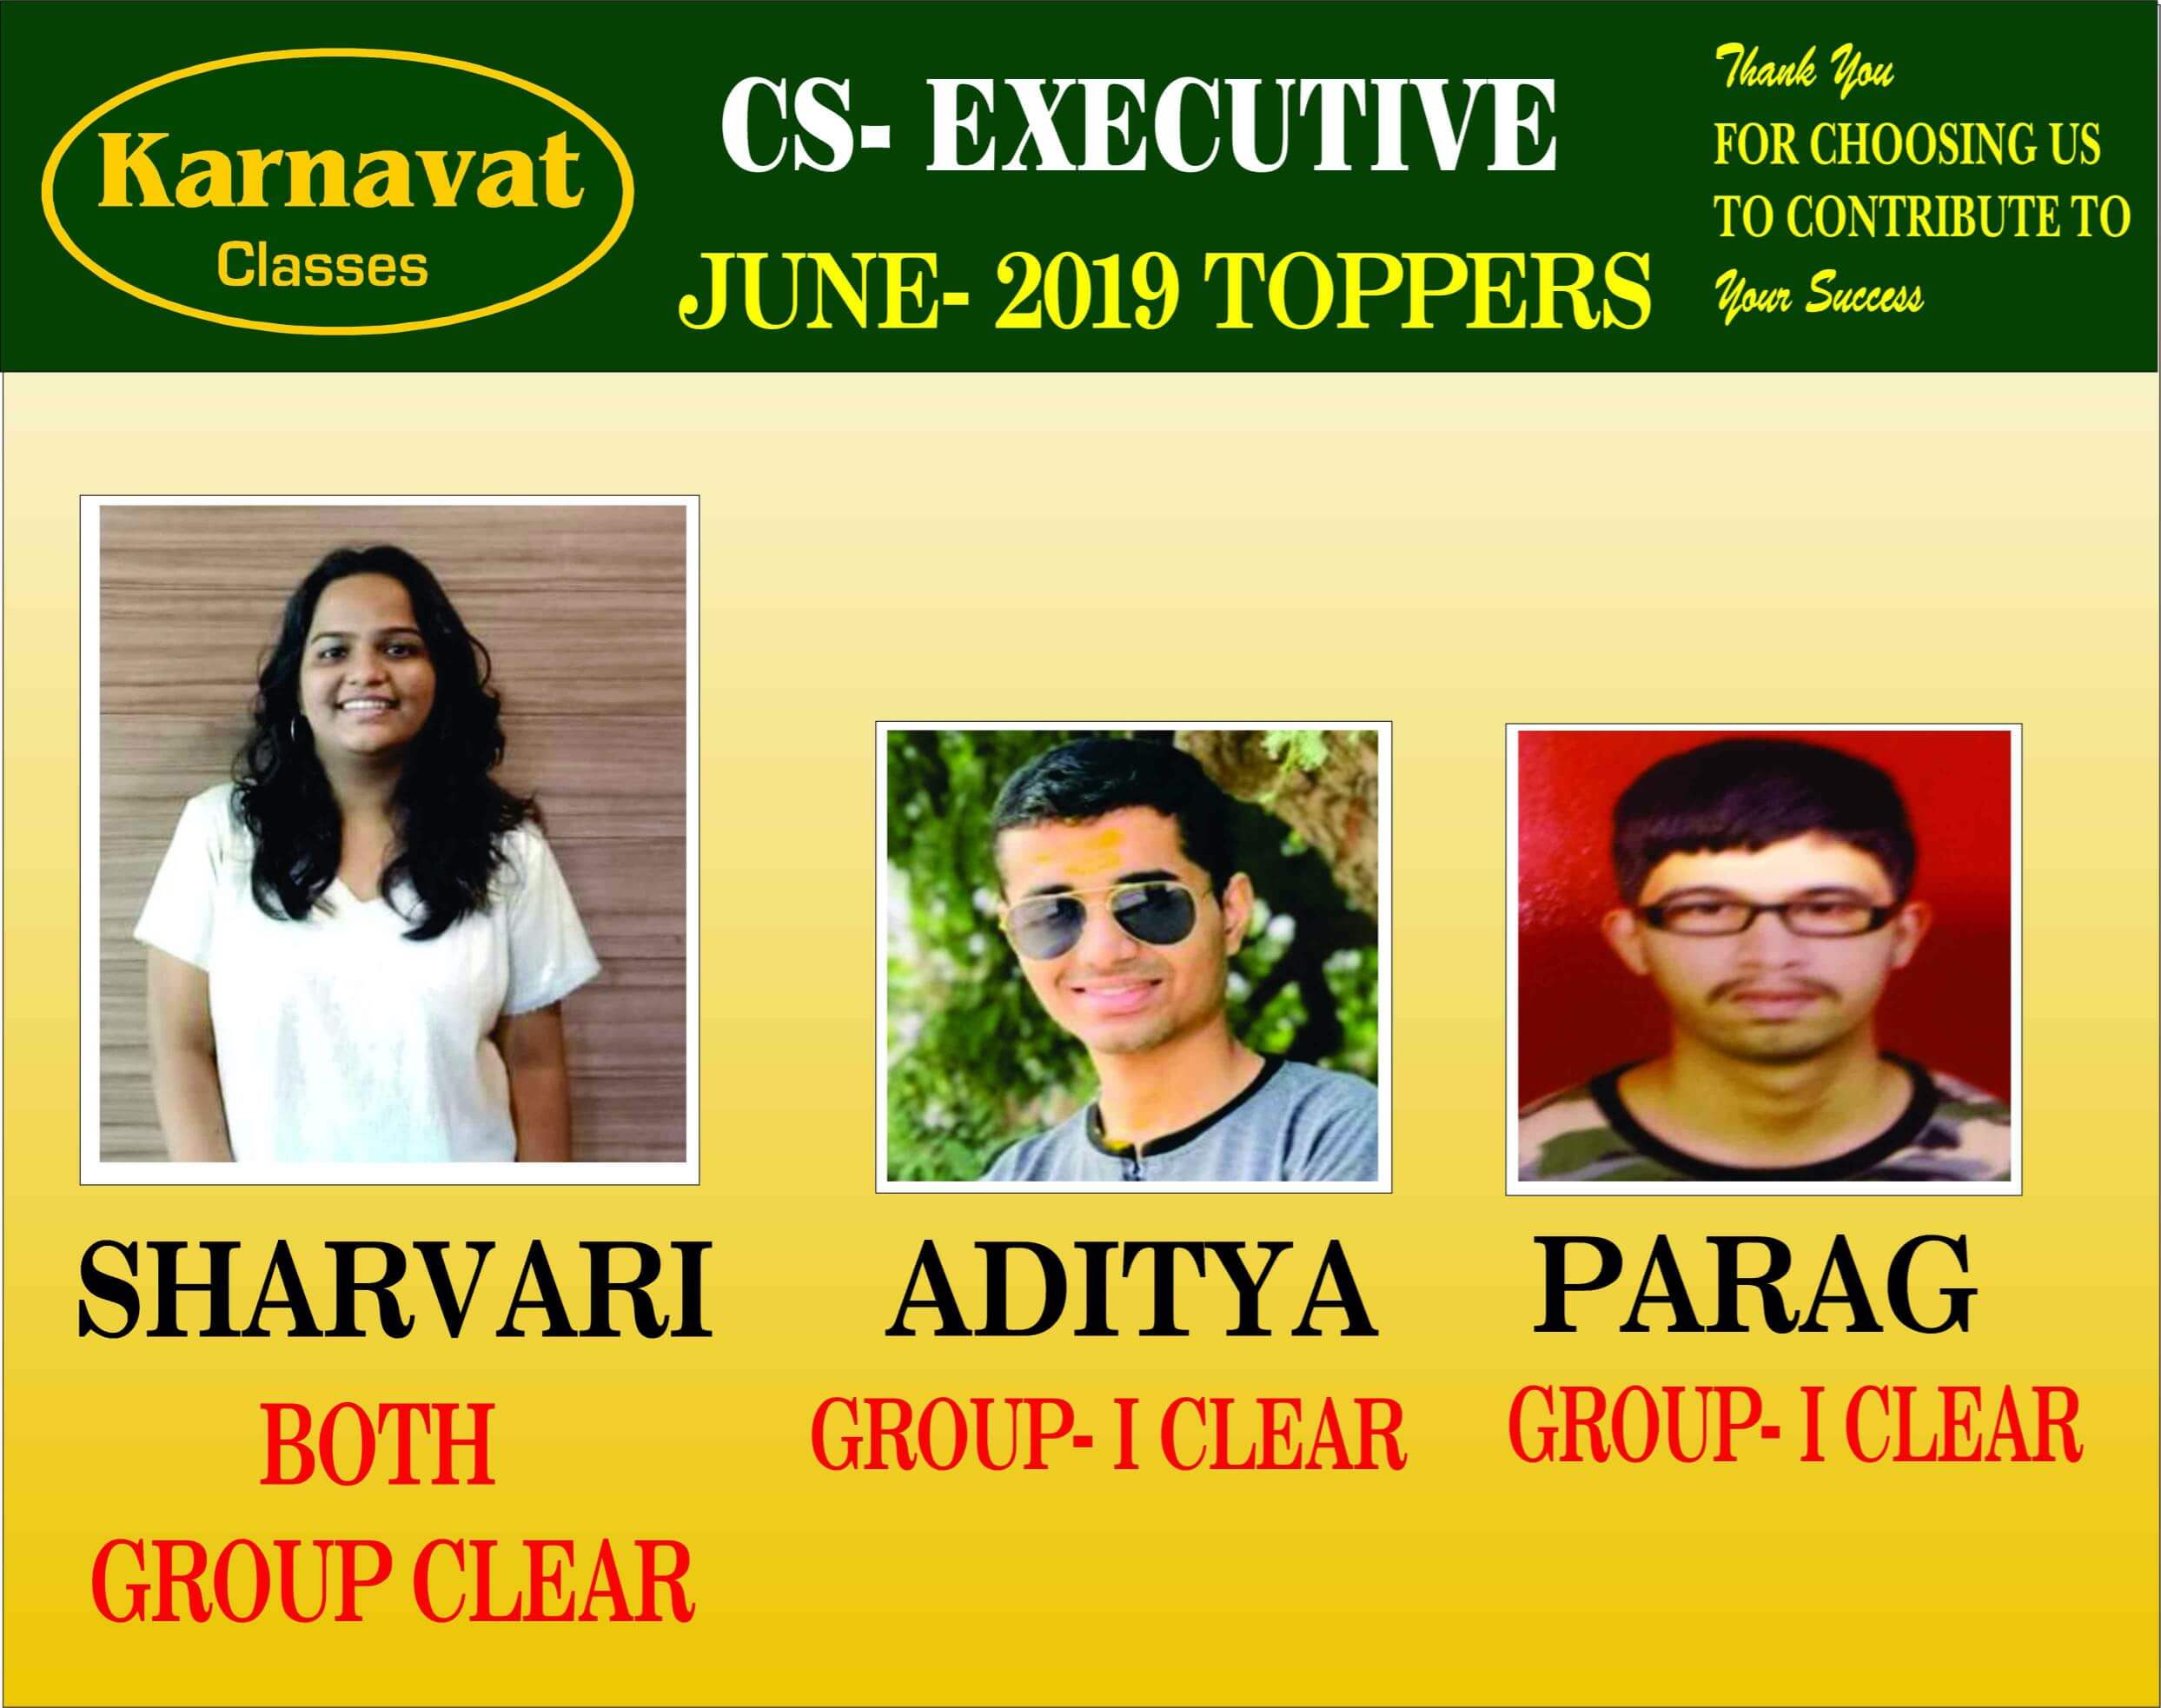 OUR CS-EXE TOPPERS